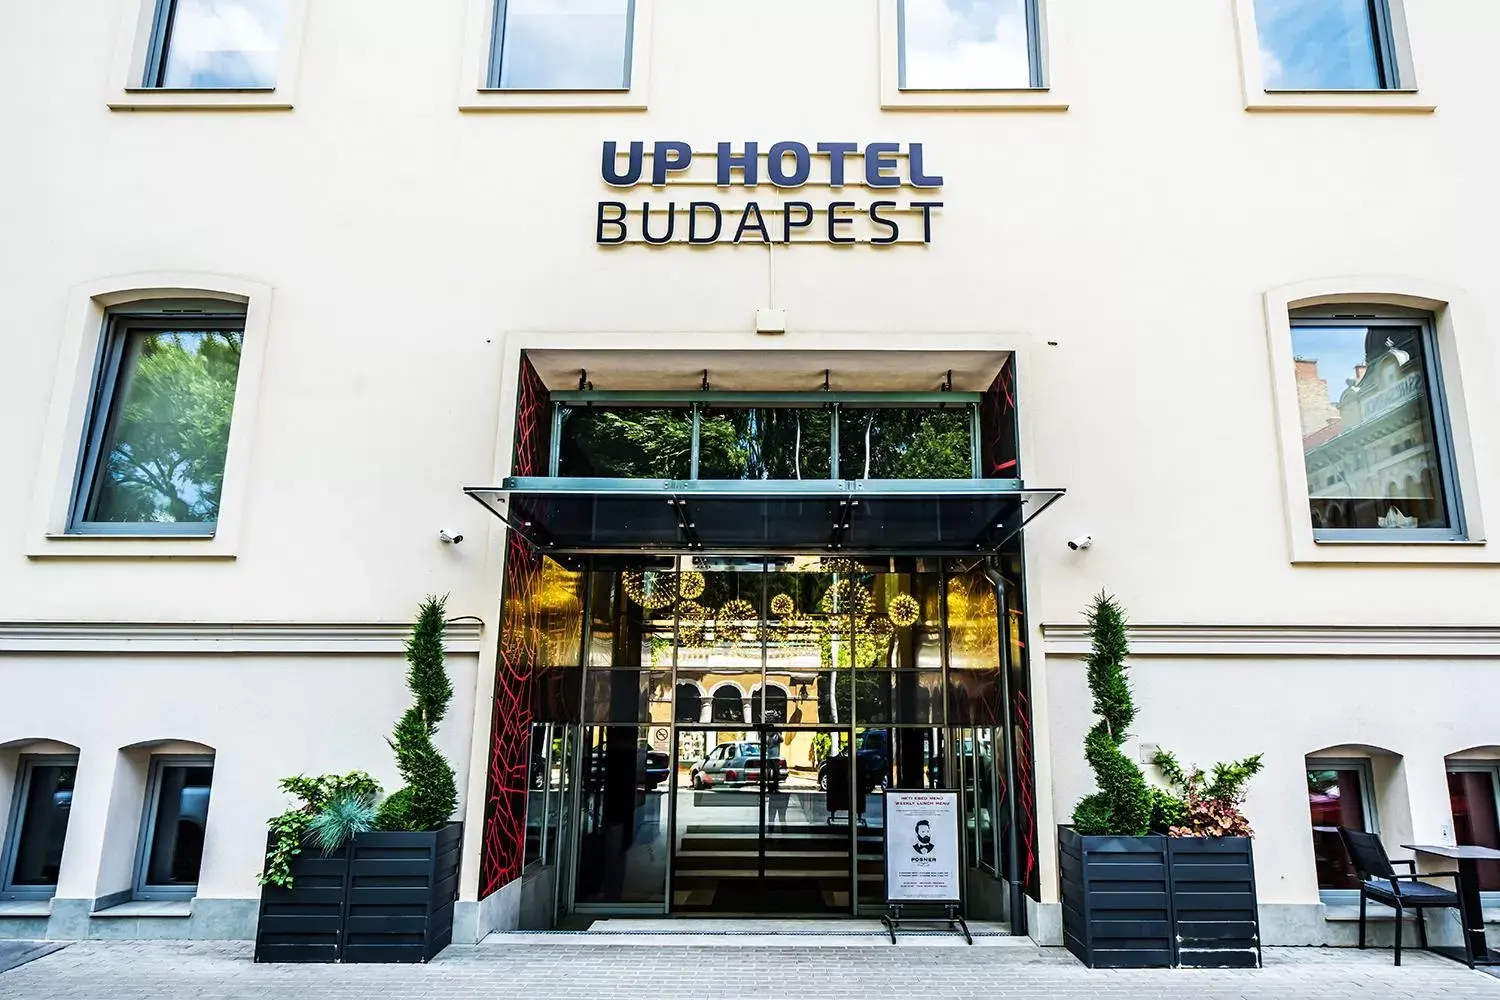 Facade/entrance in Up Hotel Budapest